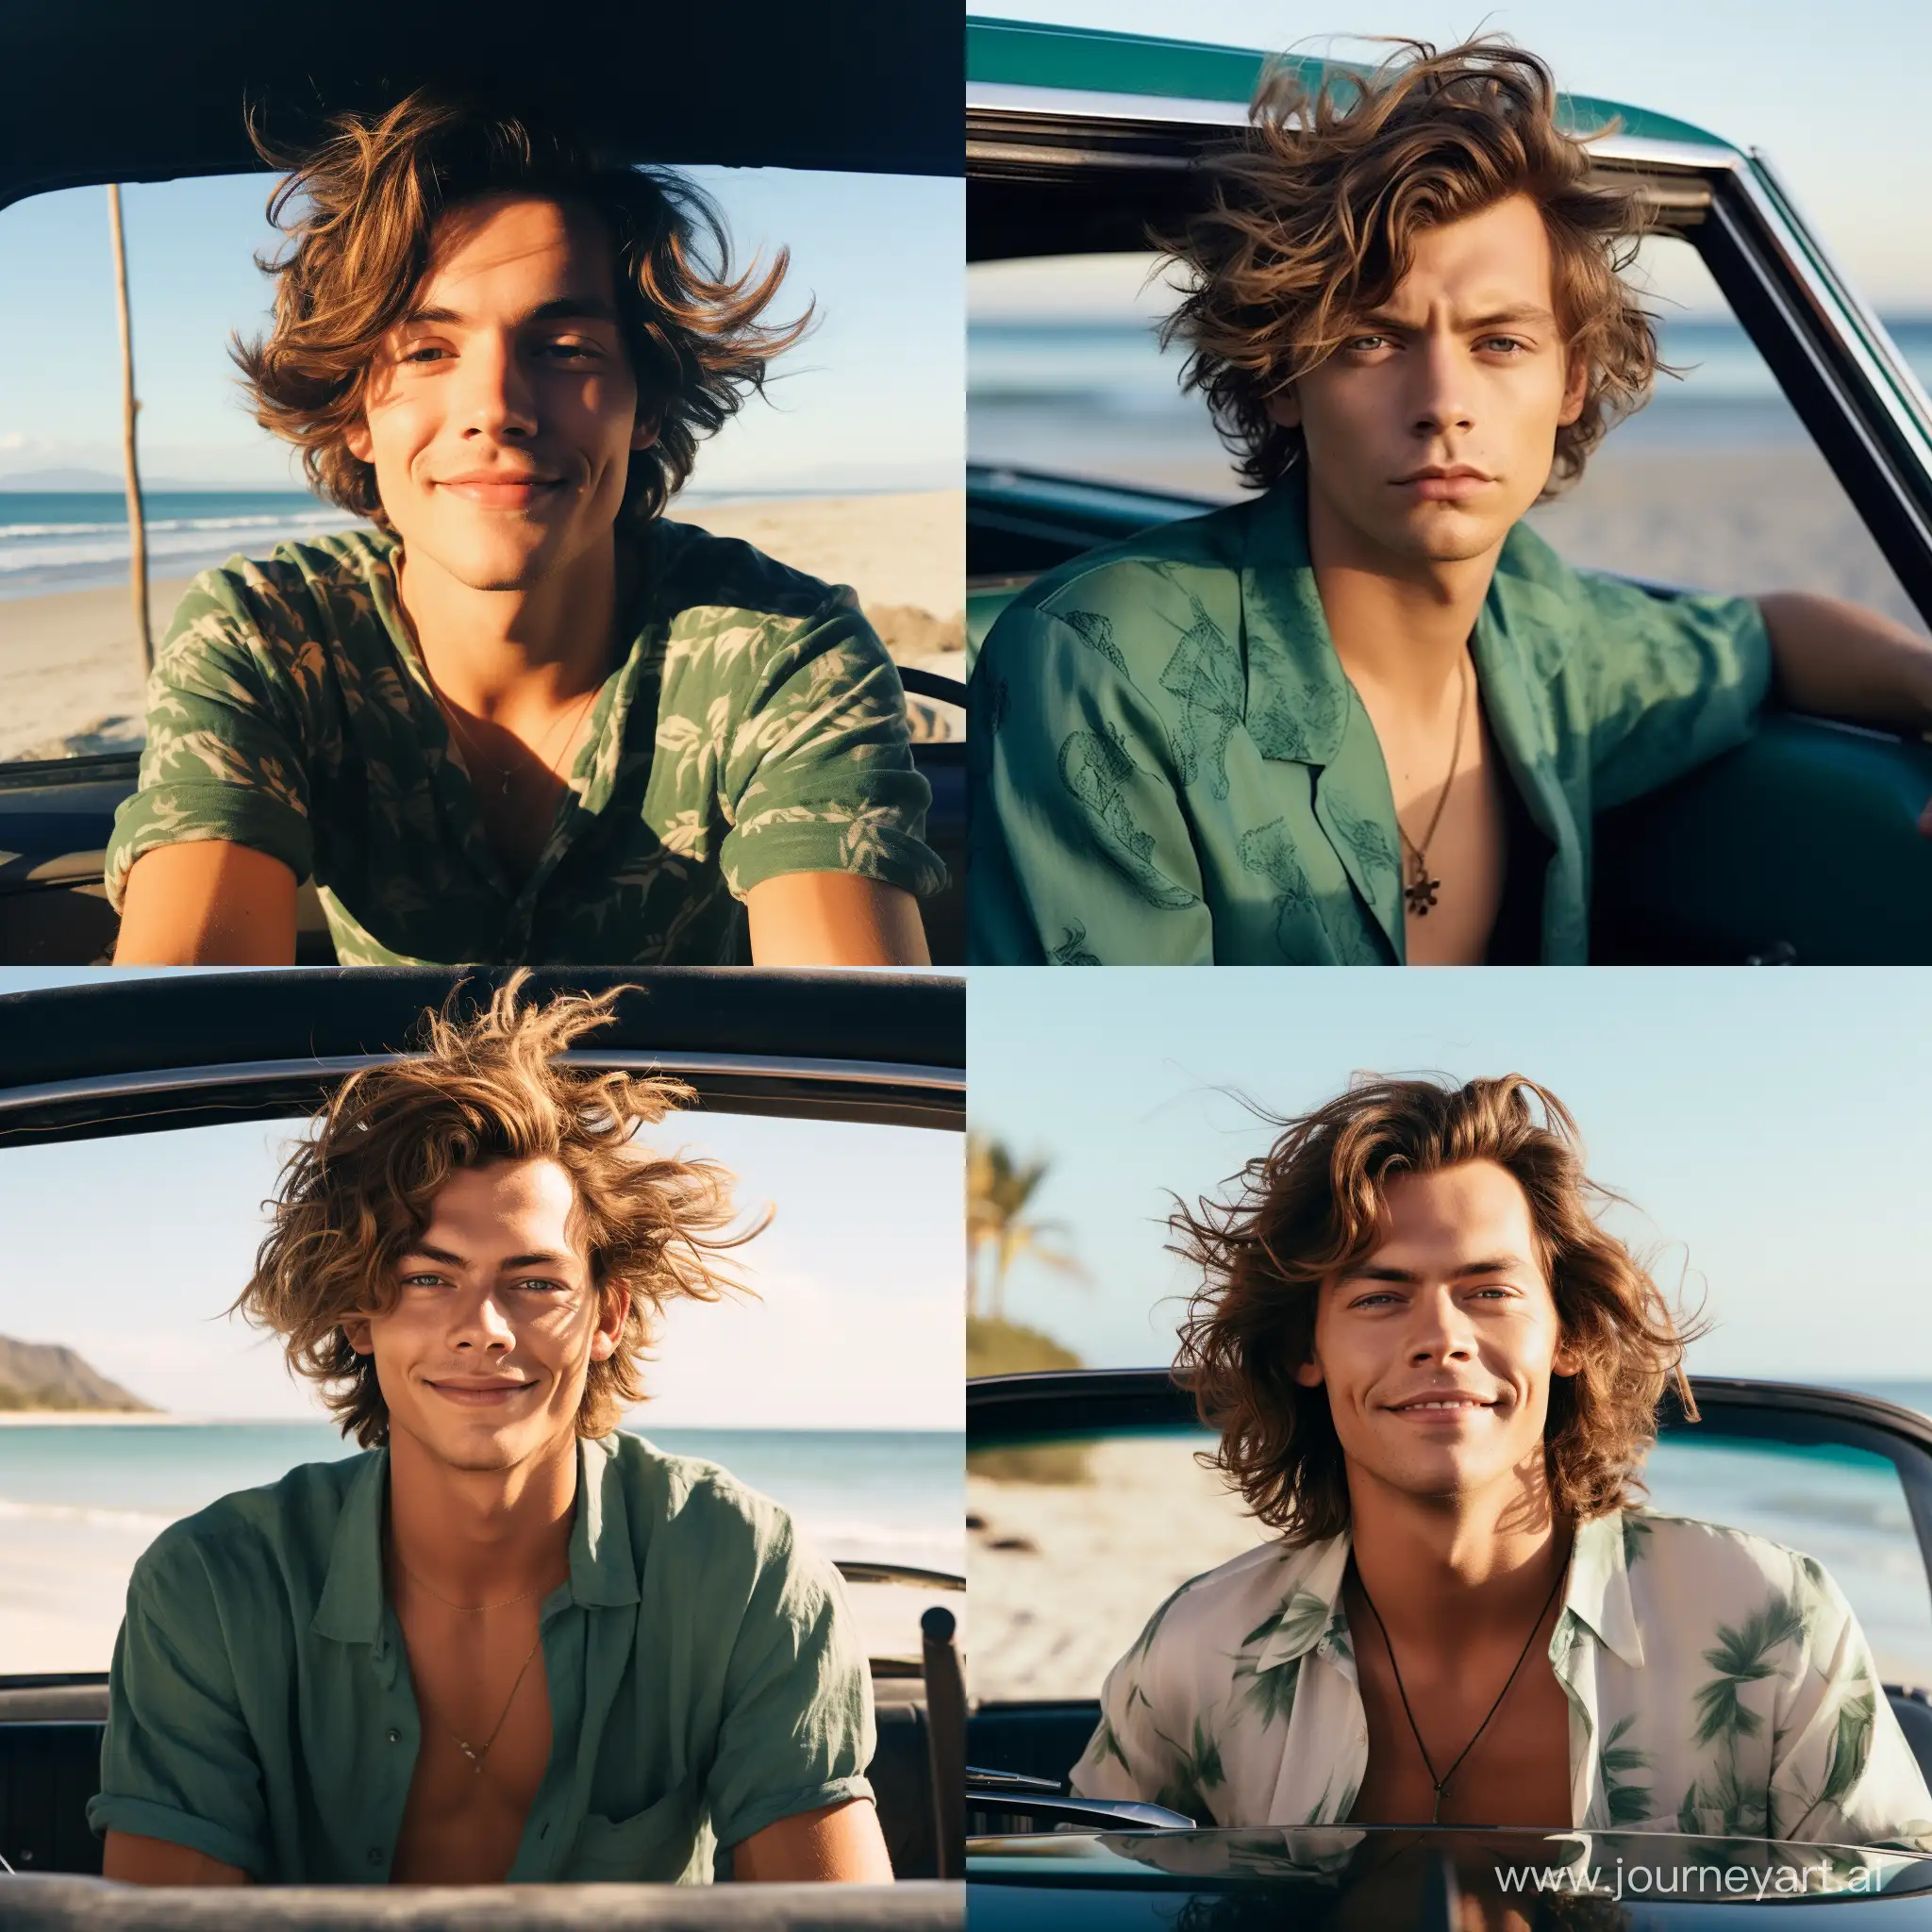 Average height, blonde, medium-length hair, green eyes, dimples on the cheeks, beautiful smile, symmetrical eyebrows, thin build with Harry Styles in a convertible on the seashore